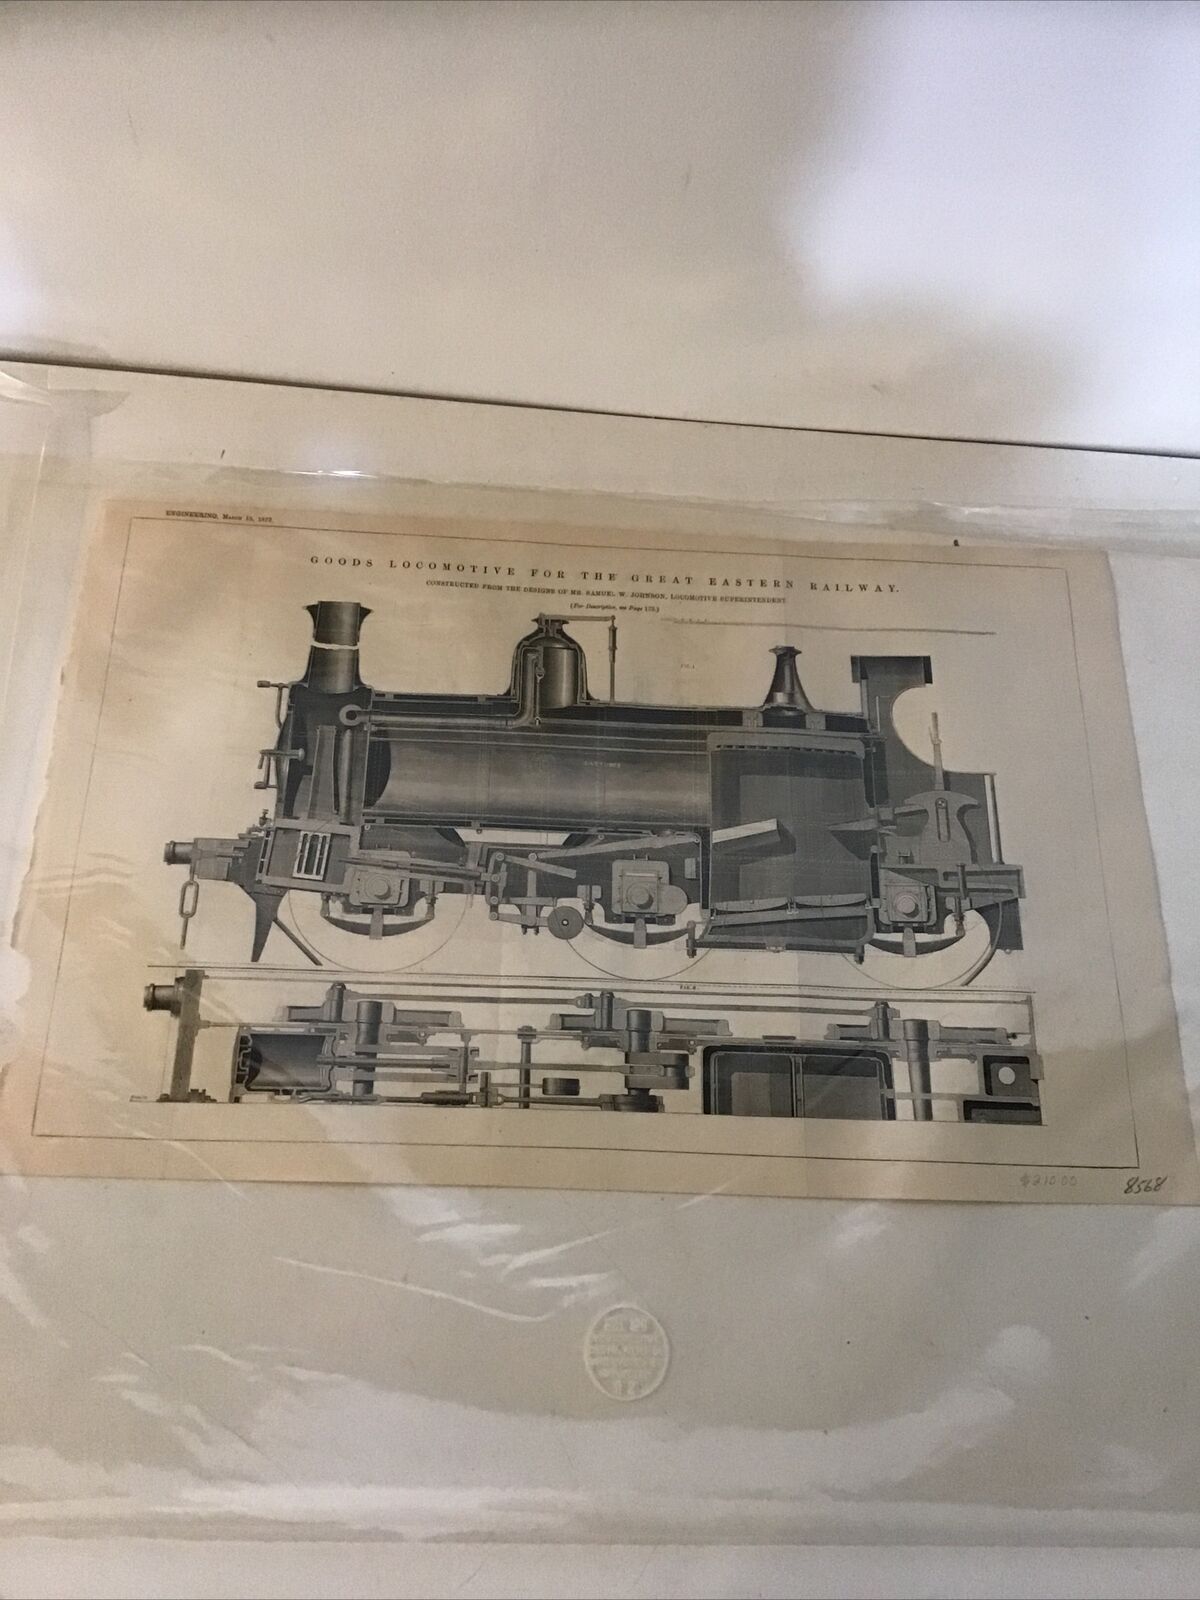 Goods Locomotive For The Great Eastern Railway Engineering March 15 1872 Johnson